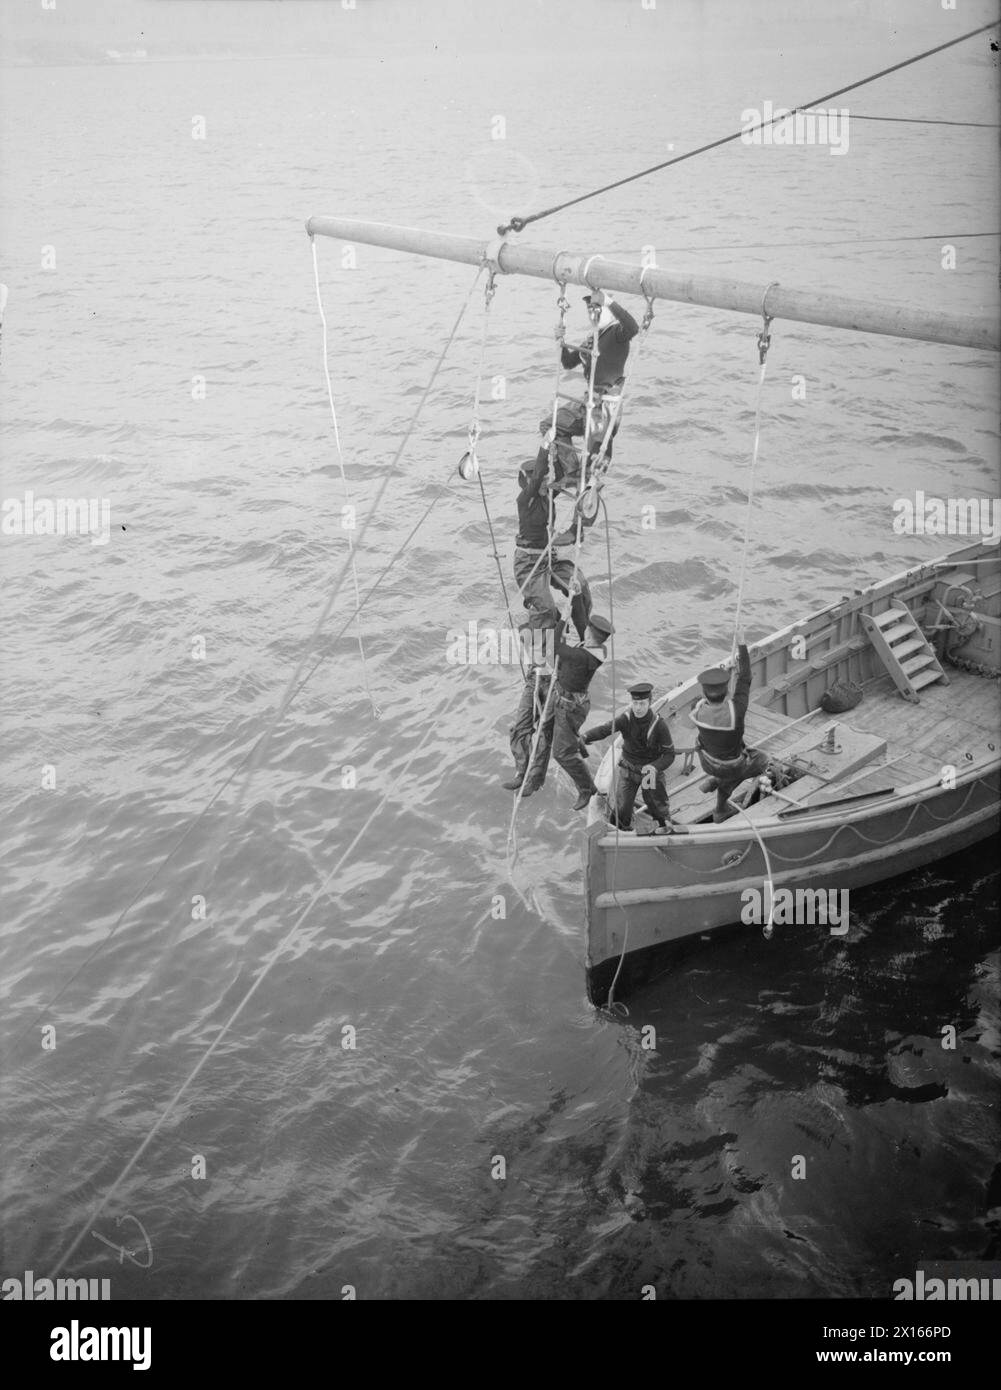 ON BOARD THE BATTLESHIP HMS RODNEY. OCTOBER 1940, SCENES IN THE DAILY ROUTINE OF THE BATTLESHIP. - An ammunition derrick being taken along to be rigged up Stock Photo